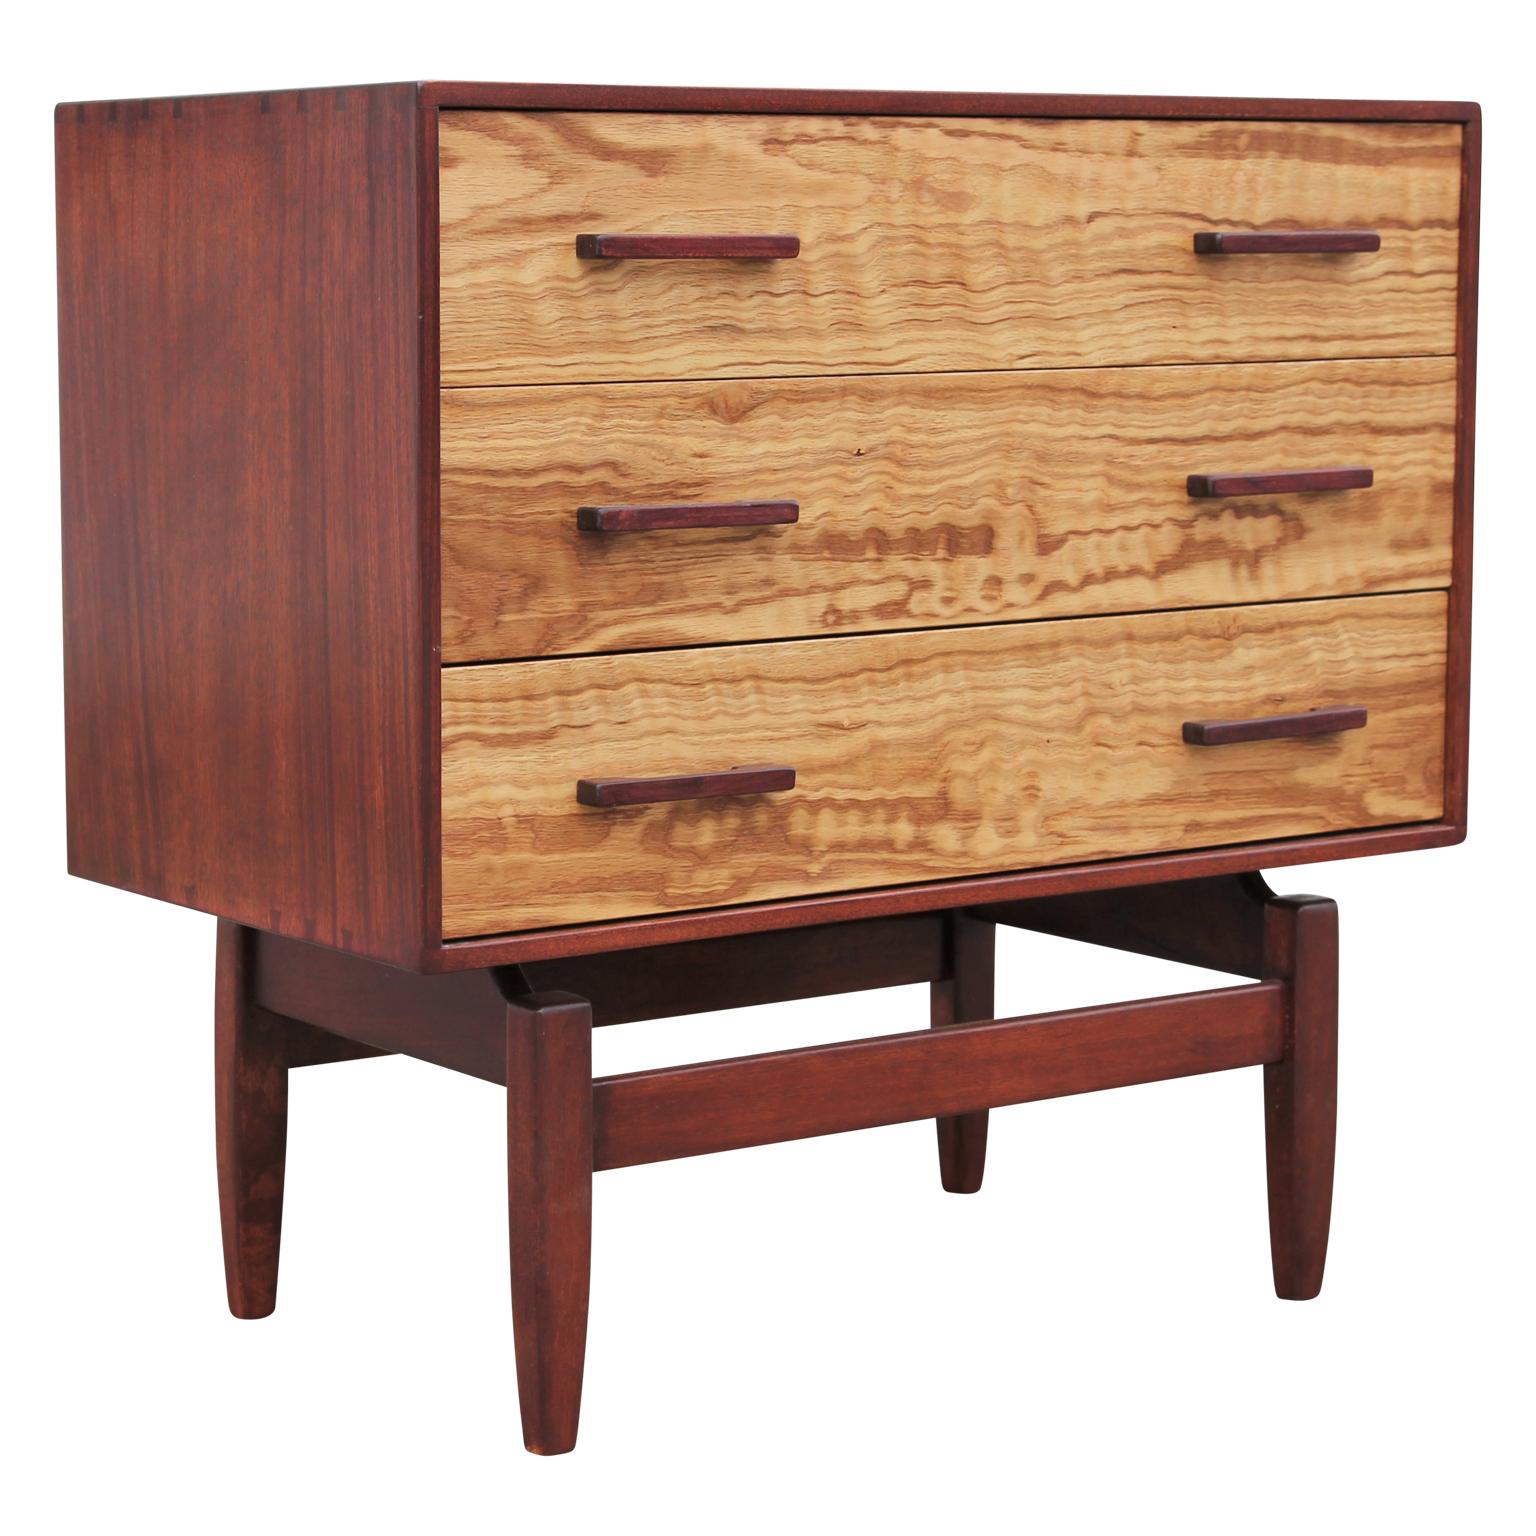 Custom three-drawer floating side table or nightstand by Norm Stoeker. The drawers are beautifully grained with dovetail joints to the top. Features a rich grain and beautiful hand hewn joinery. Beautiful quality and construction including